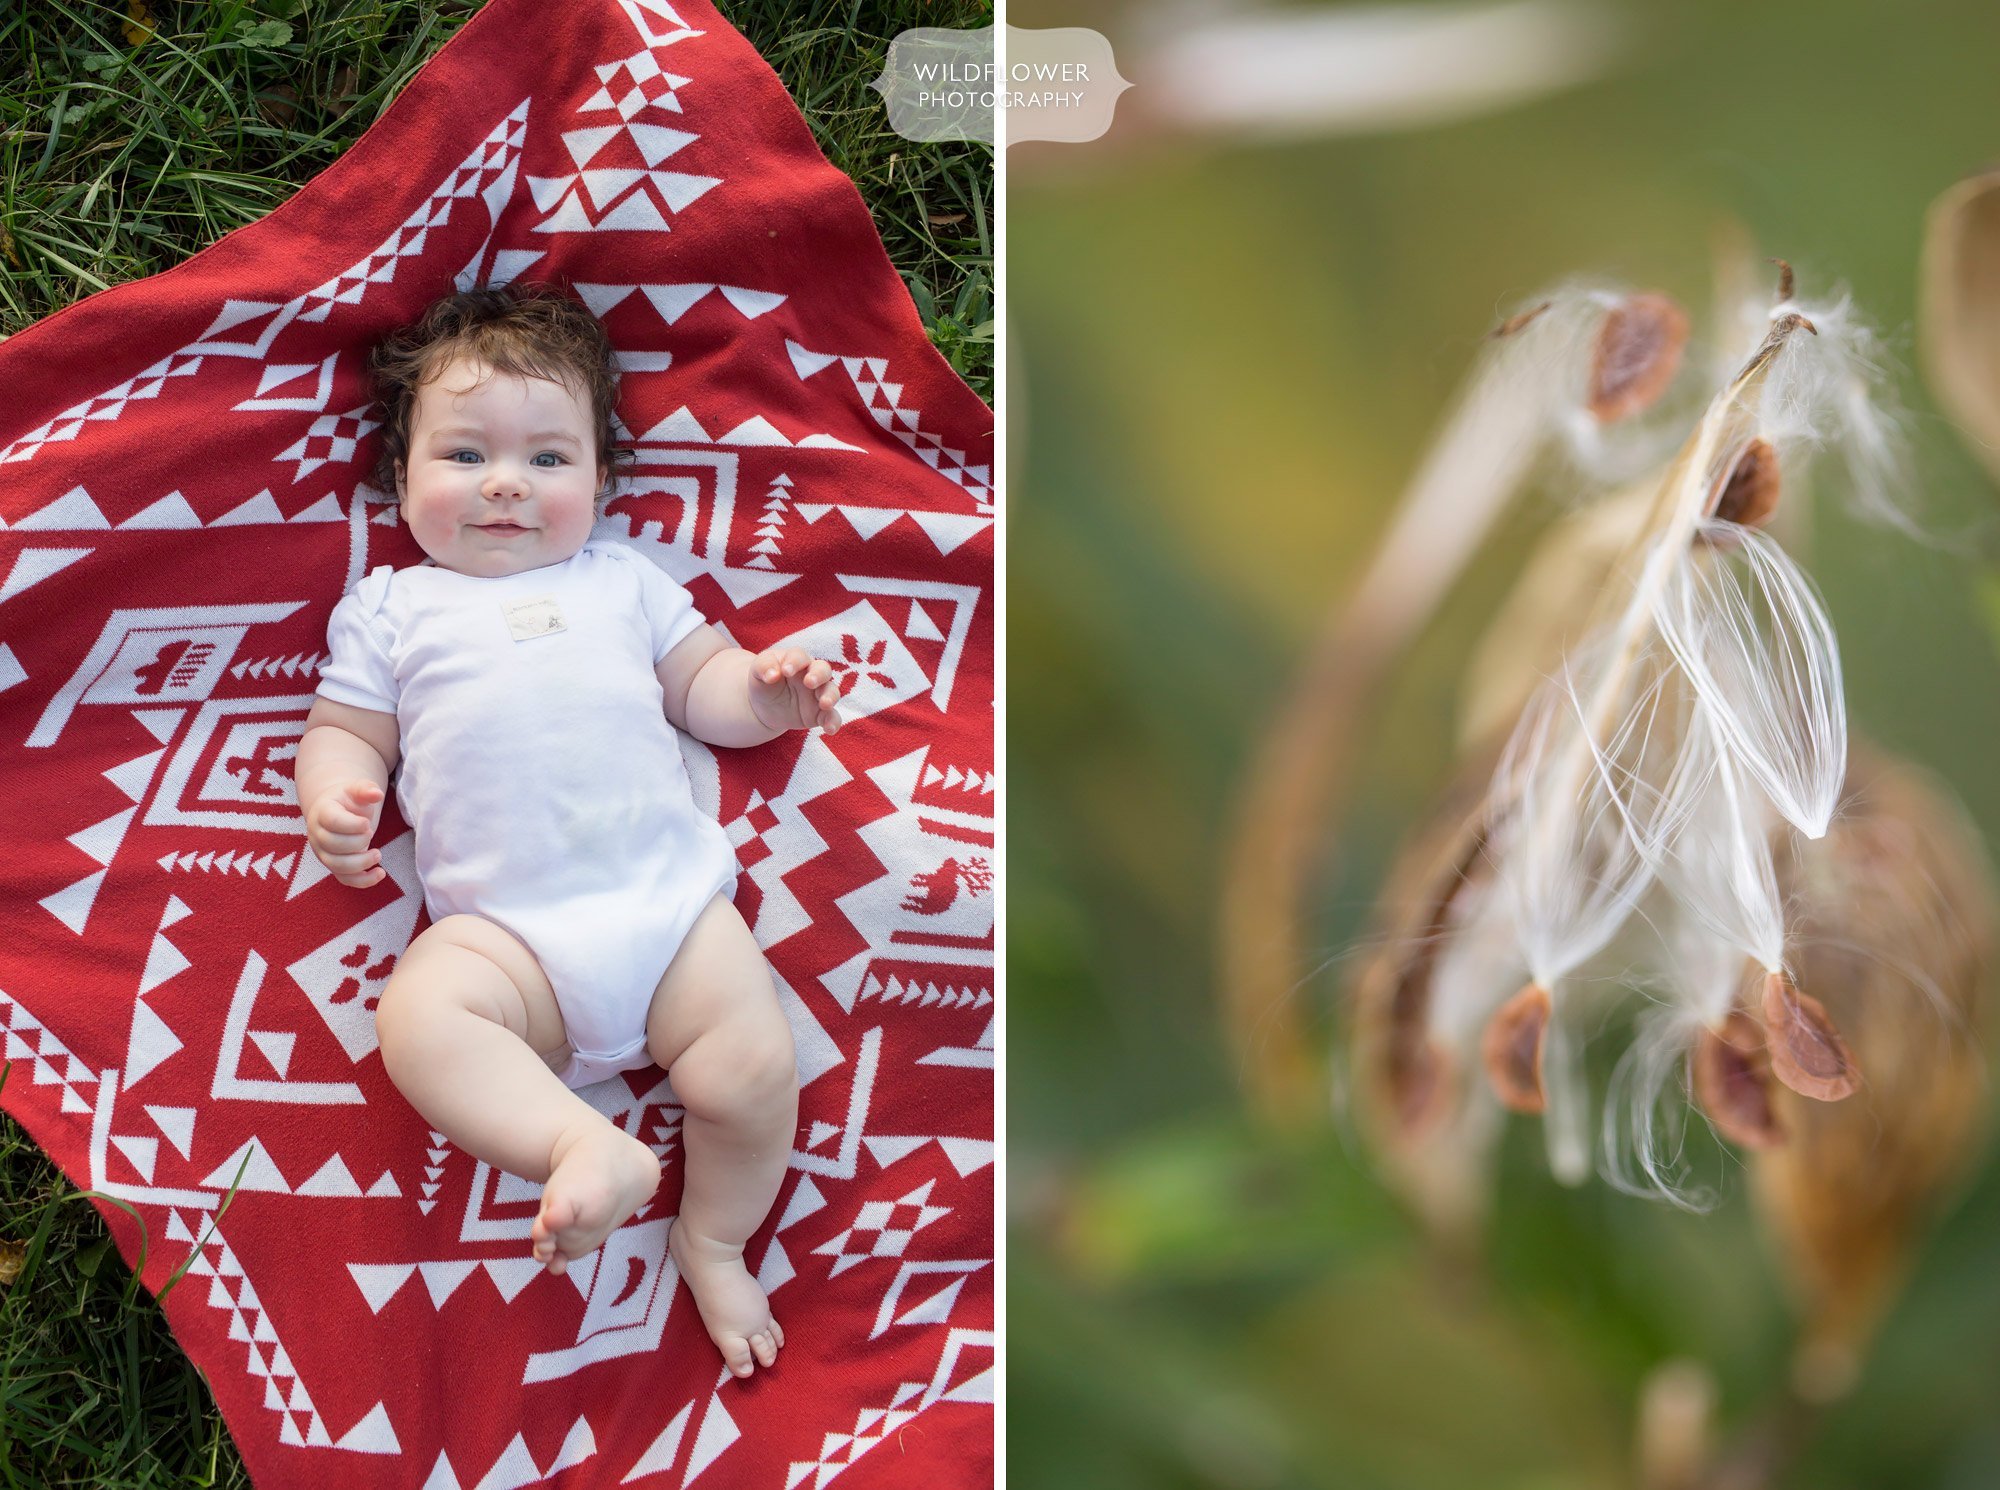 Baby on a Native American style red blanket for this outdoor park family photography session.